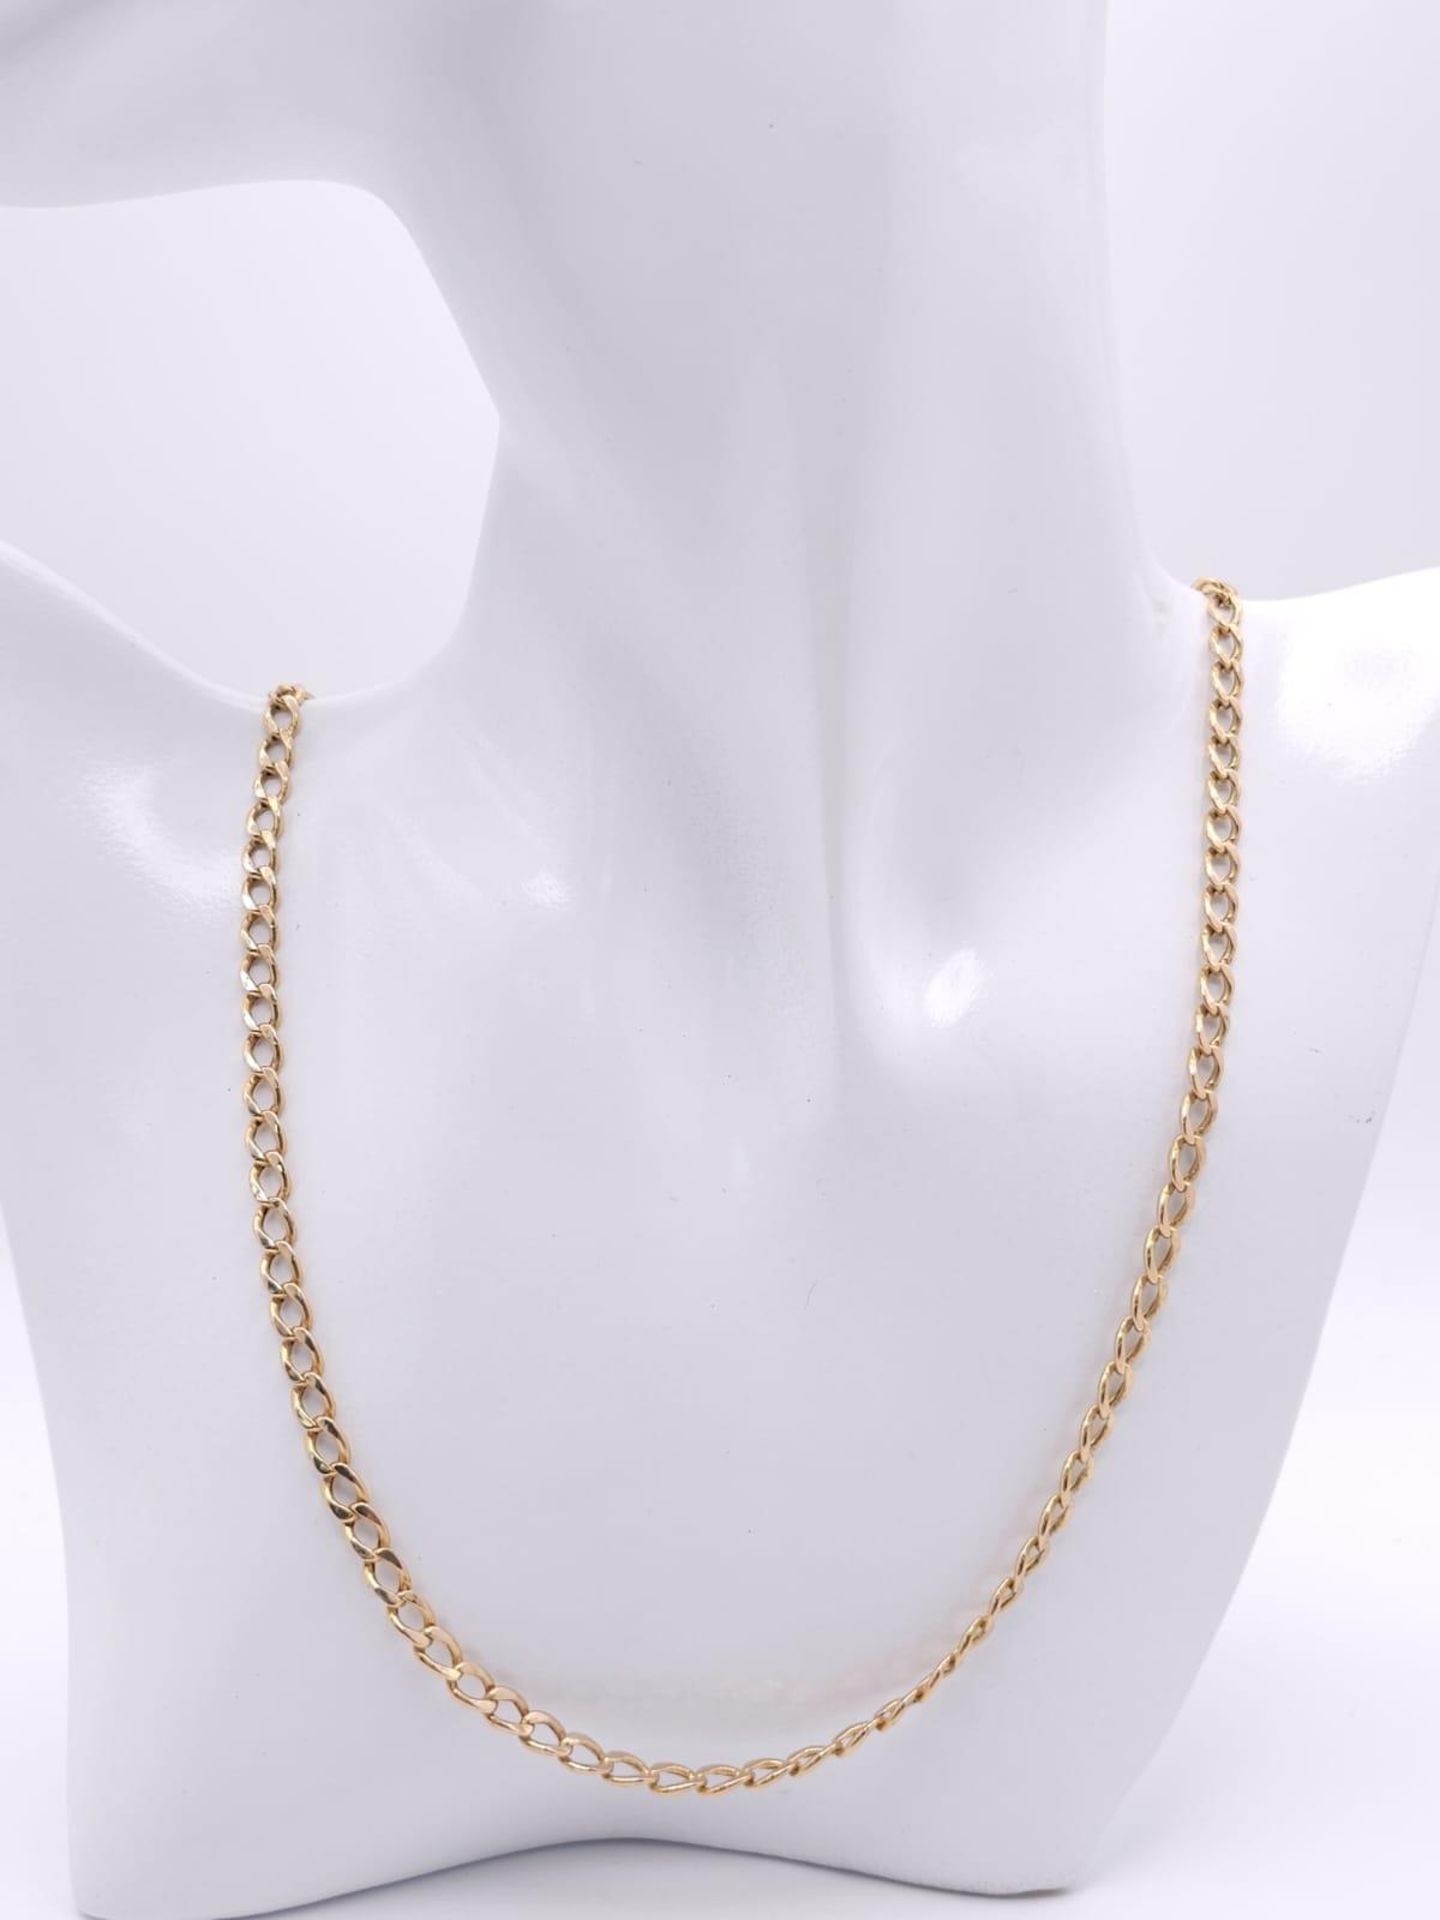 A 9K Yellow Gold Flat Curb Link Chain. 53cm length. 5.5g weight. - Image 5 of 5